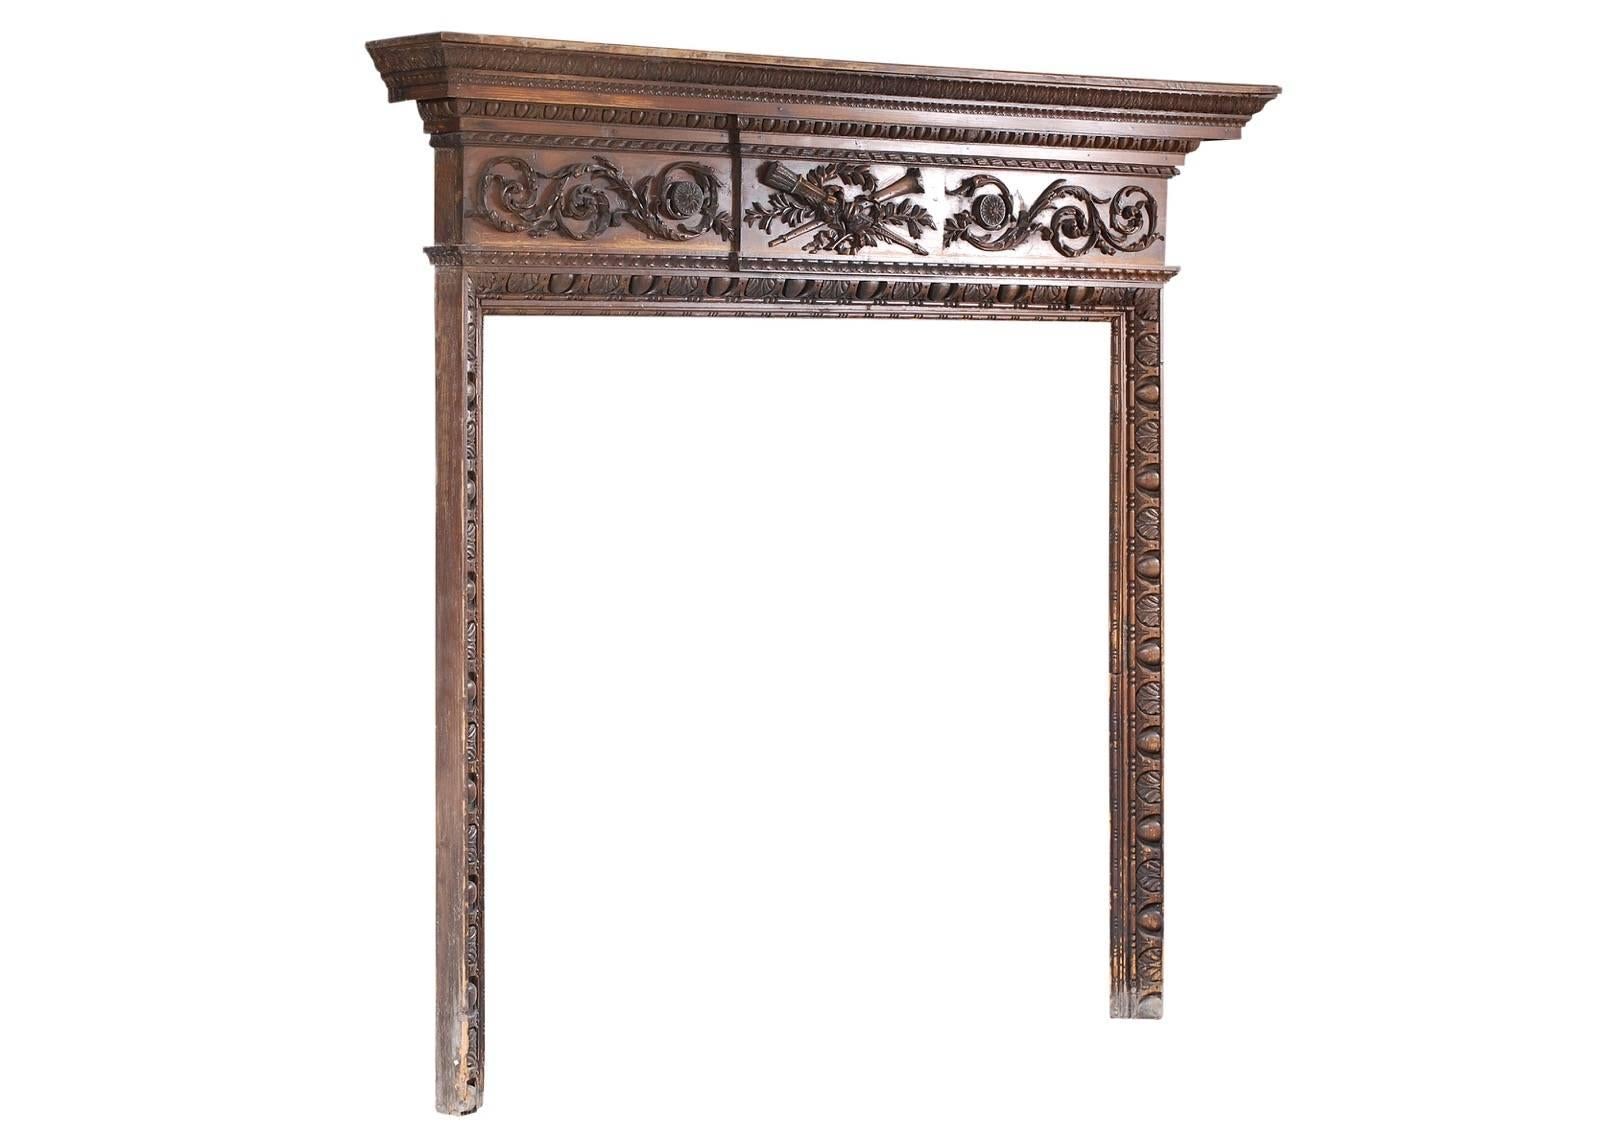 A very good quality late 18th century carved pine English fireplace. The centre panel with carved quiver, foliage and ribbons, with running scrolled foliage and paterae to frieze. Pediment shelf with egg and tongue, ribbon and stiff acanthus leaf